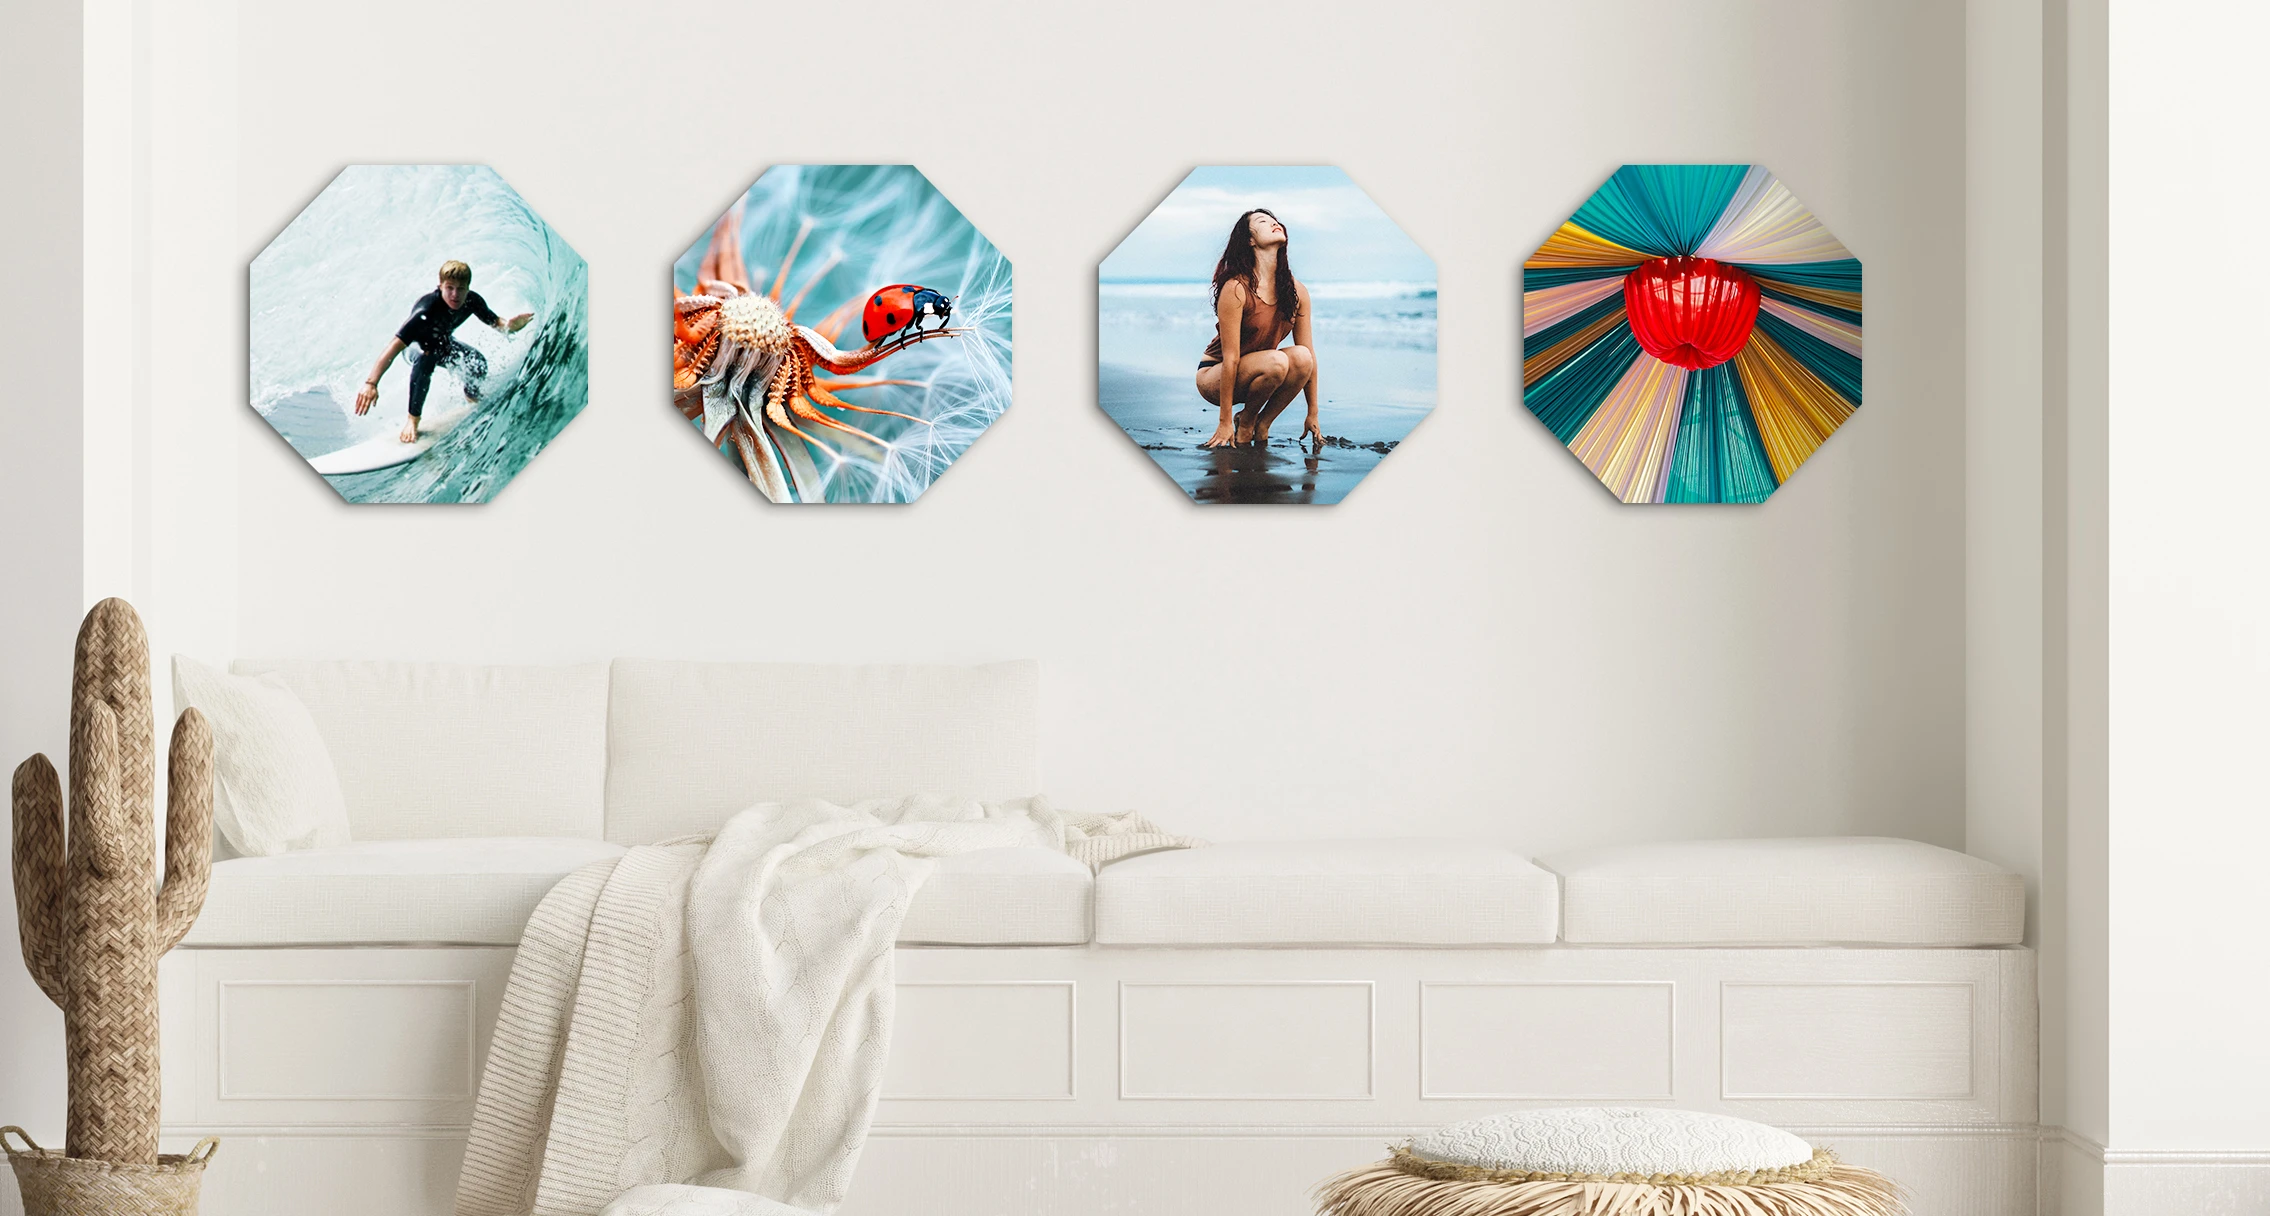 4 different motifs in Octagon format hang on a wall in living room.